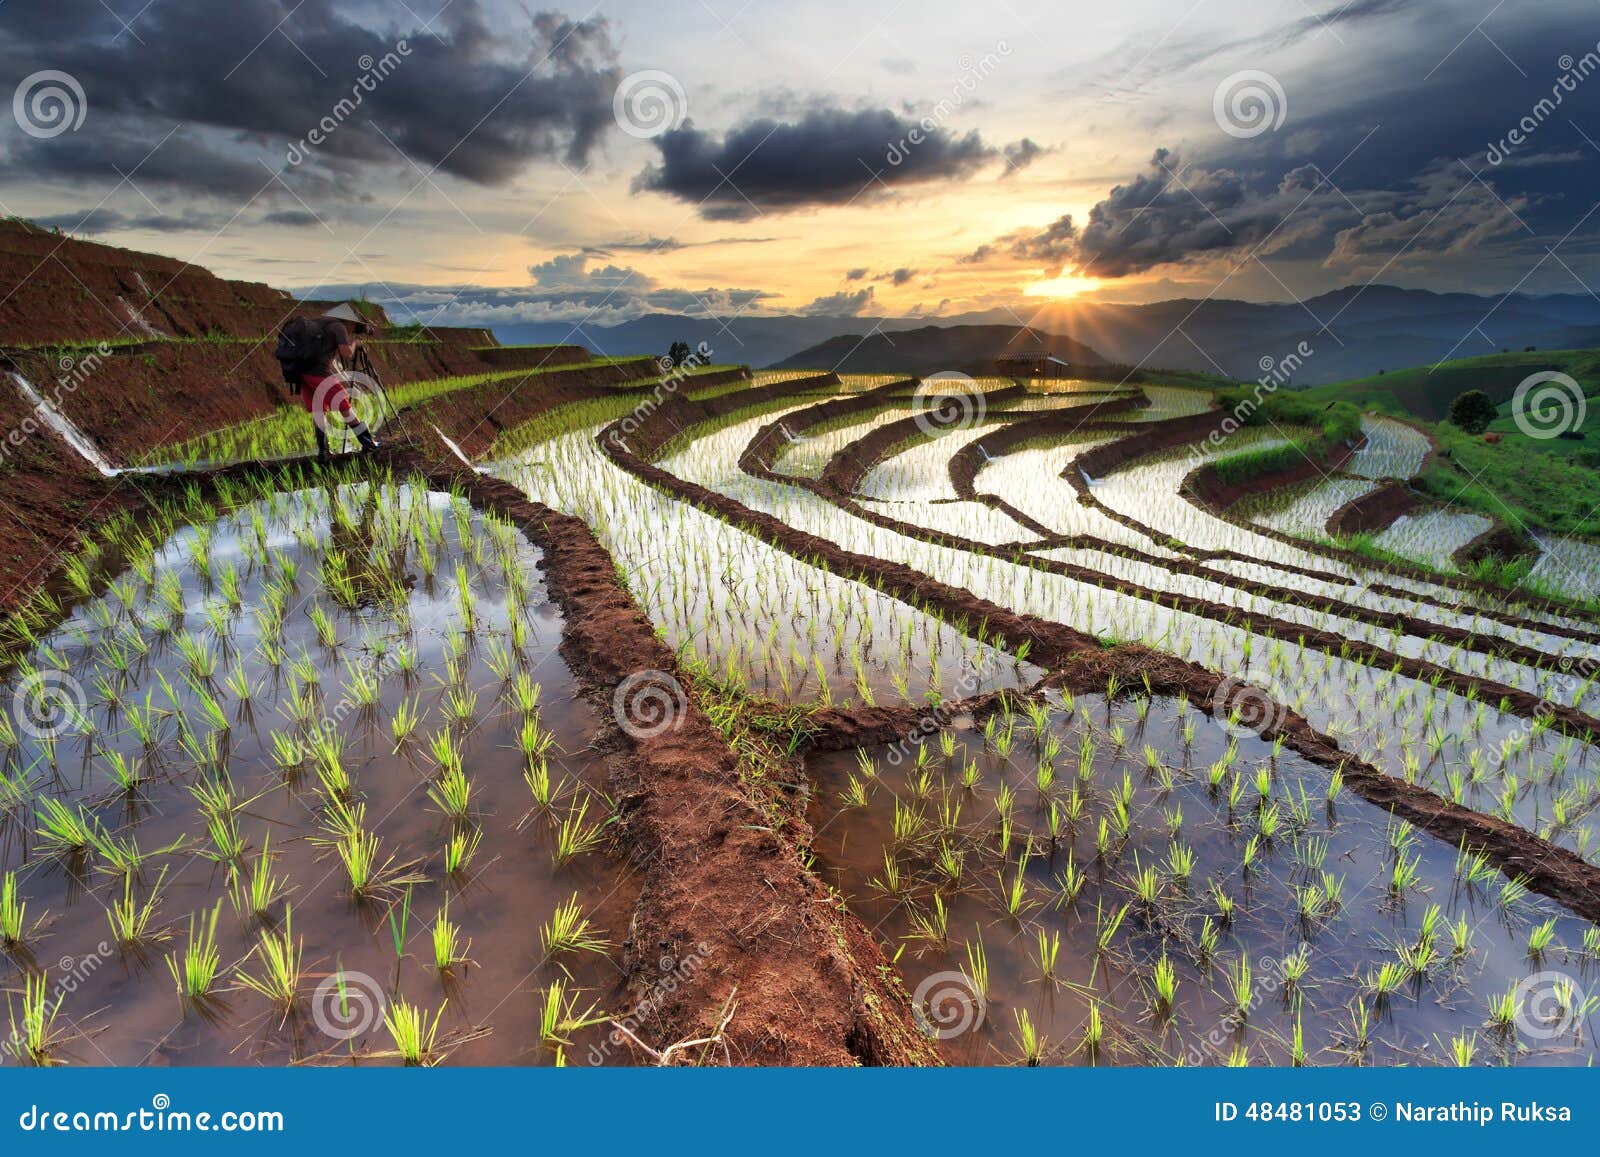 rice fields on terraced at chiang mai, thailand